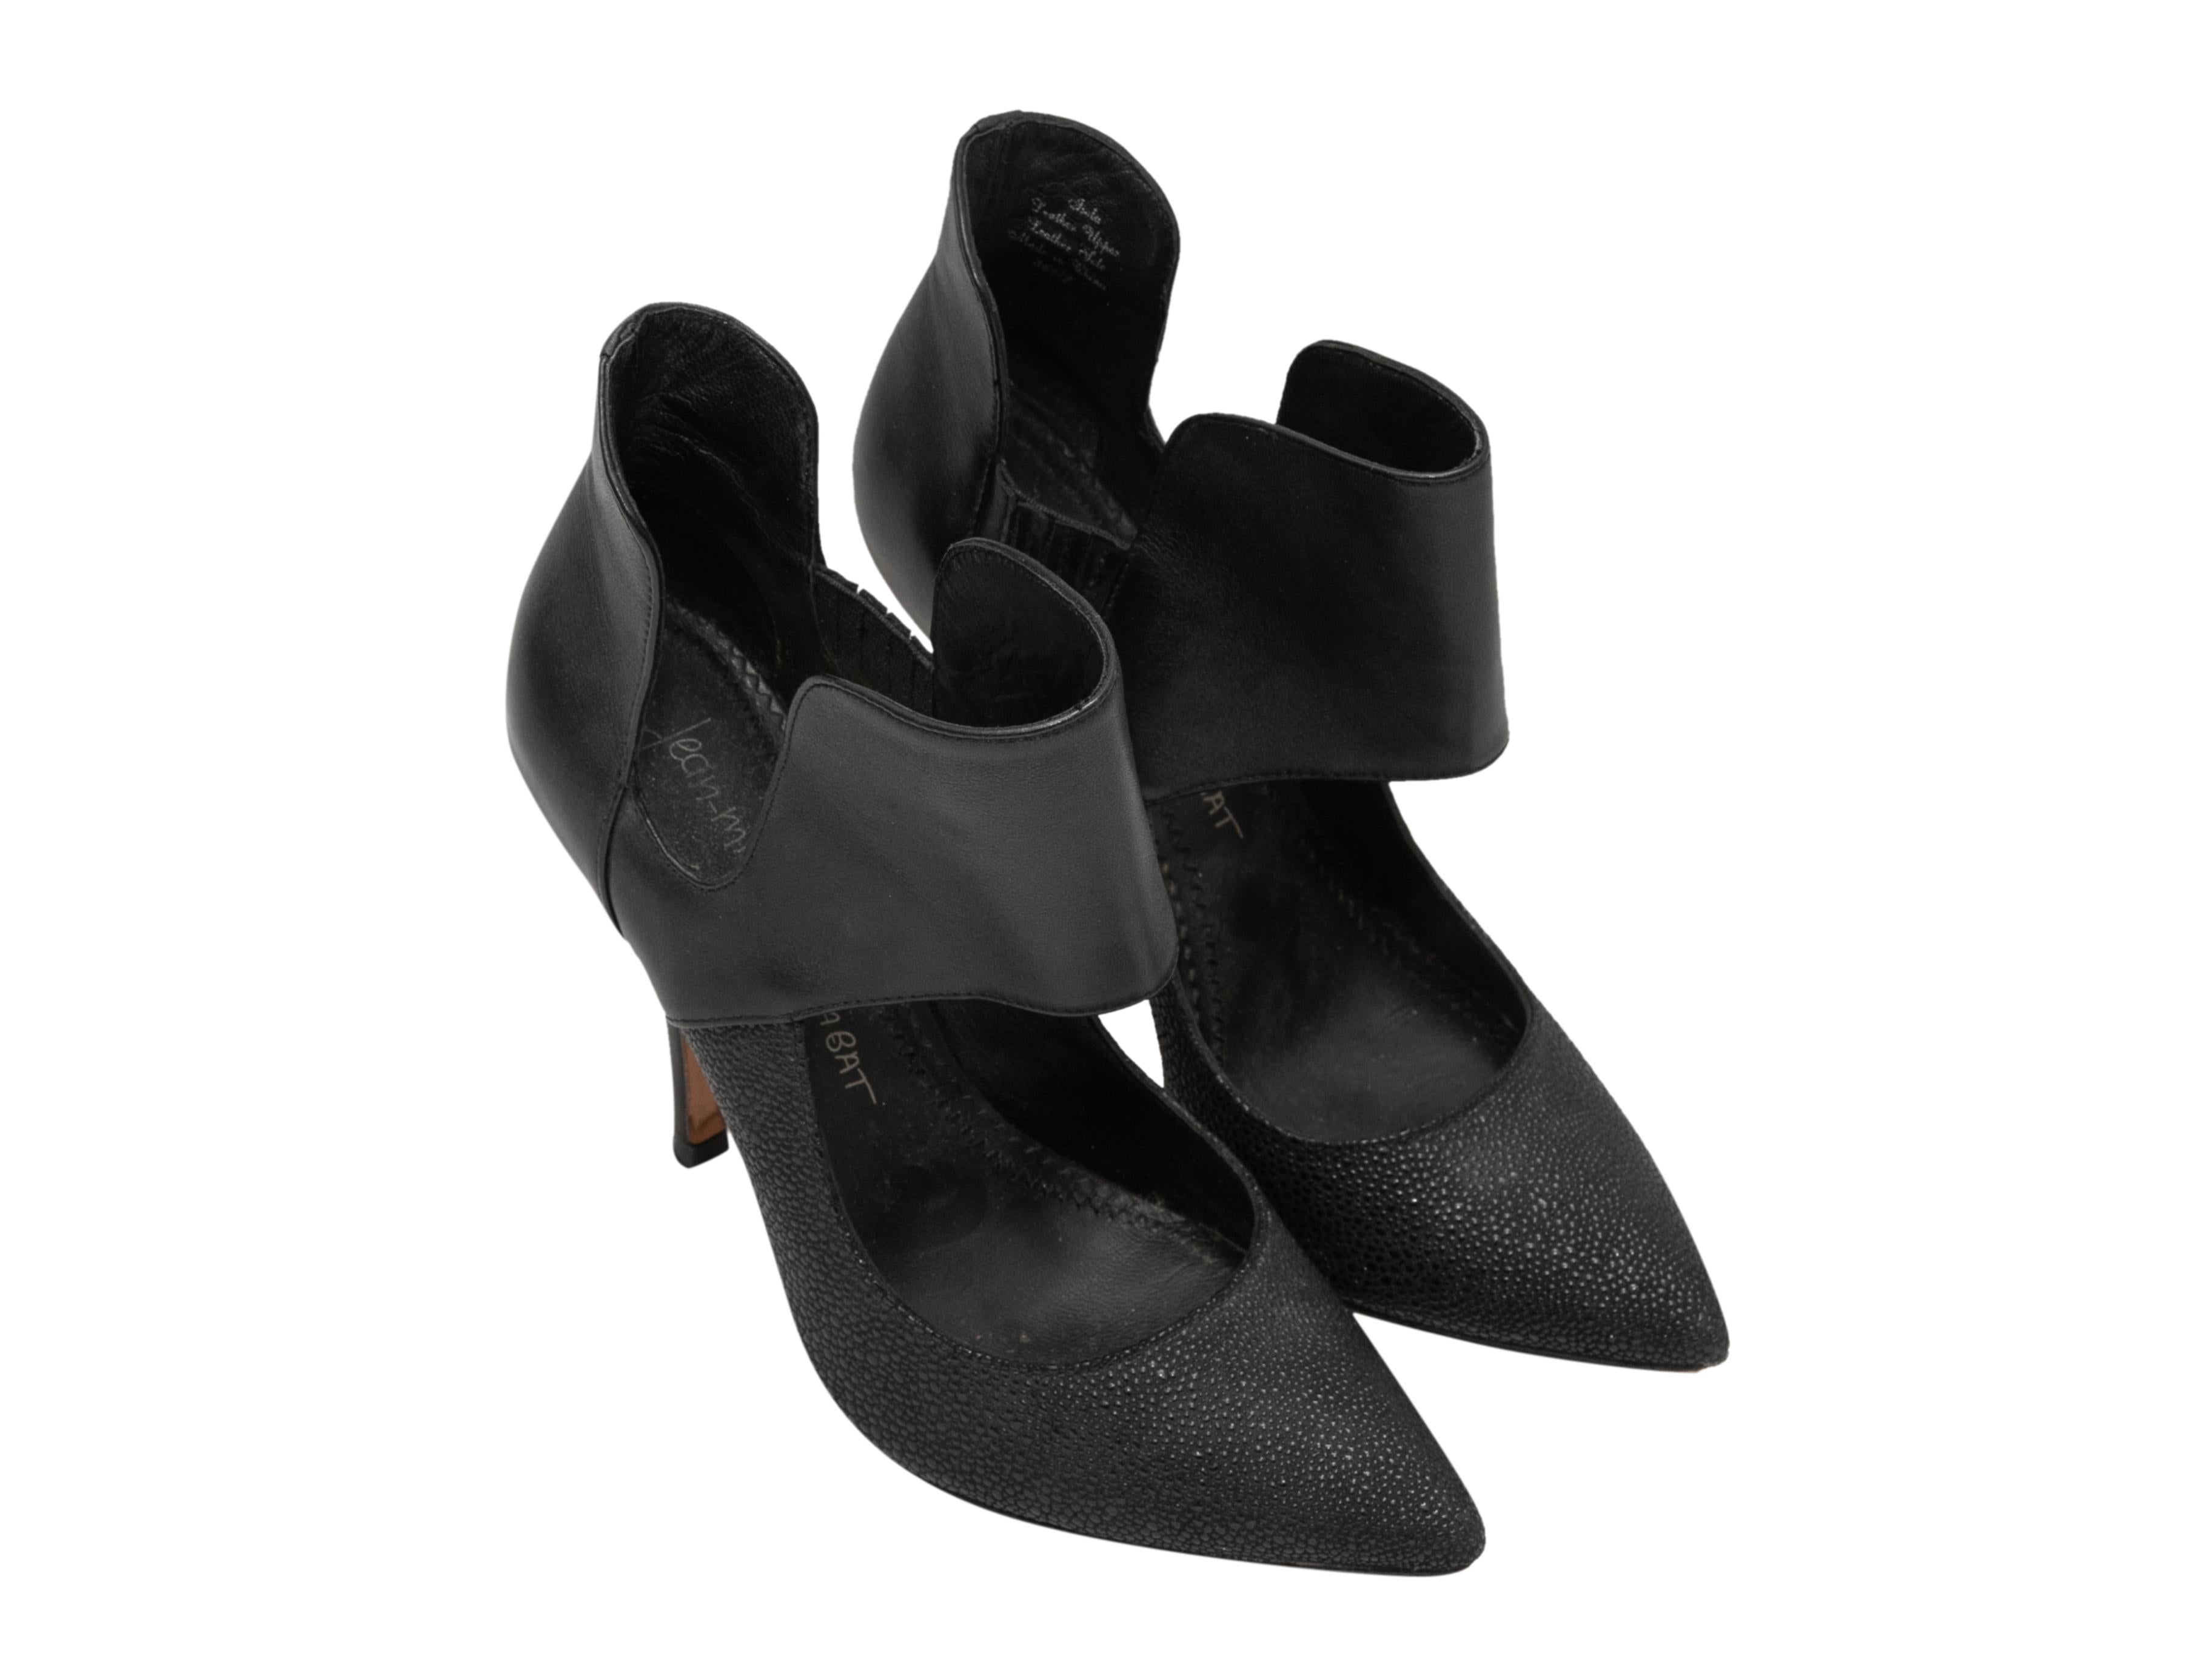 Black leather pointed-toe cutout booties by Jean Michel Cazabat. Elasticized gores at sides. 3.5